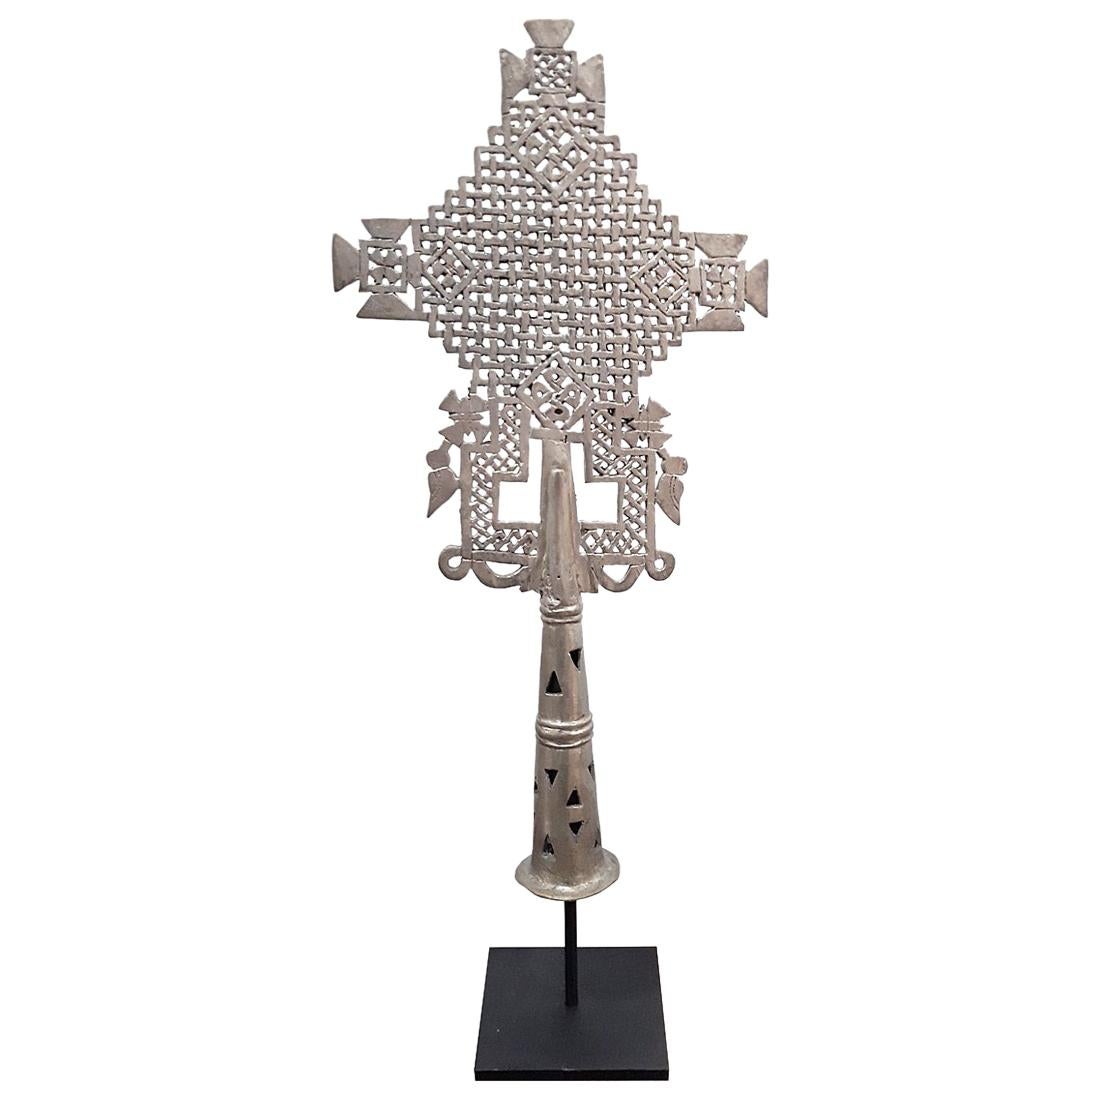 A vintage Coptic cross from Ethiopia, hand carved in silver plated copper, circa 1940. 

These silver, copper or brass crosses are symbols of Coptic / Orthodox Christianity in Ethiopia and Eritrea. Their elaborate design distinguishes them from